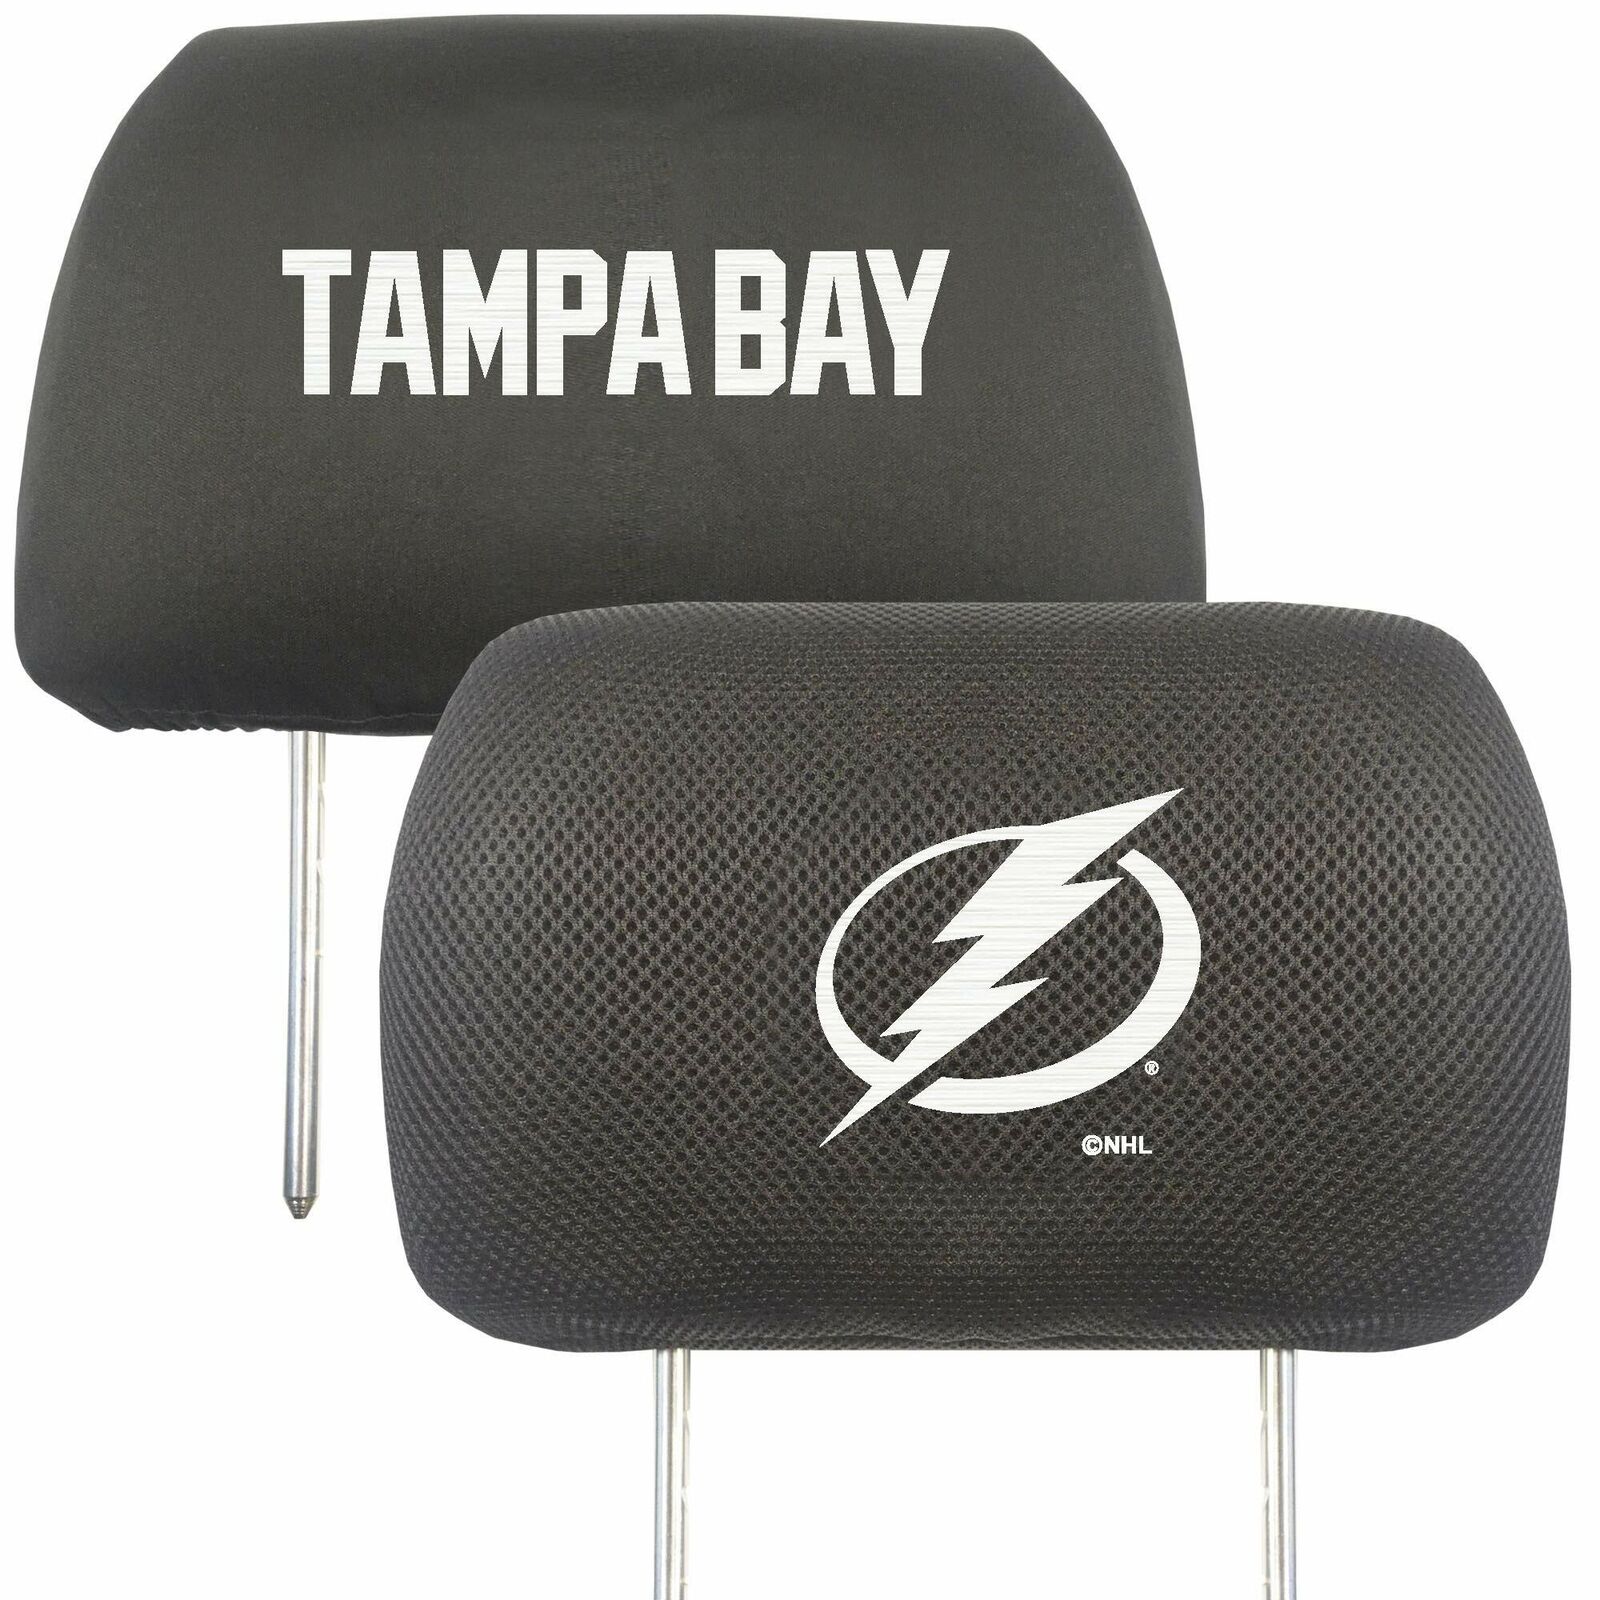 FANMATS 25118 Tampa Bay Lightning Embroidered Head Rest Cover Set - 2 Pieces